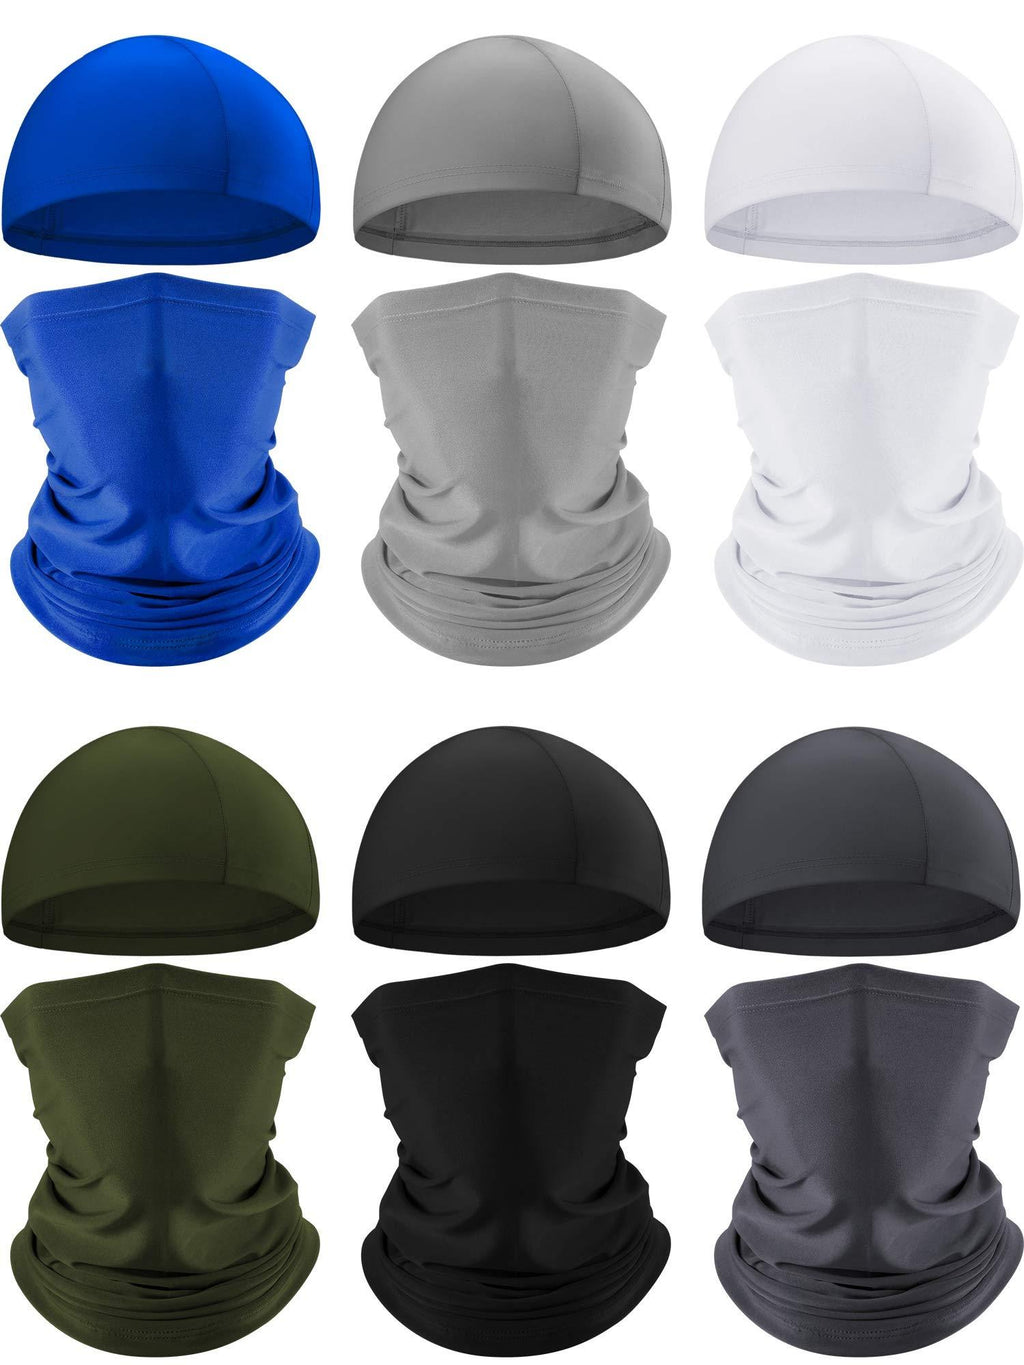 [AUSTRALIA] - SATINIOR 6 Pieces Summer Face Cover UV Protection Neck Gaiter and 6 Pieces Cooling Skull Caps Beanie Helmet Line Hat for Women and Men 